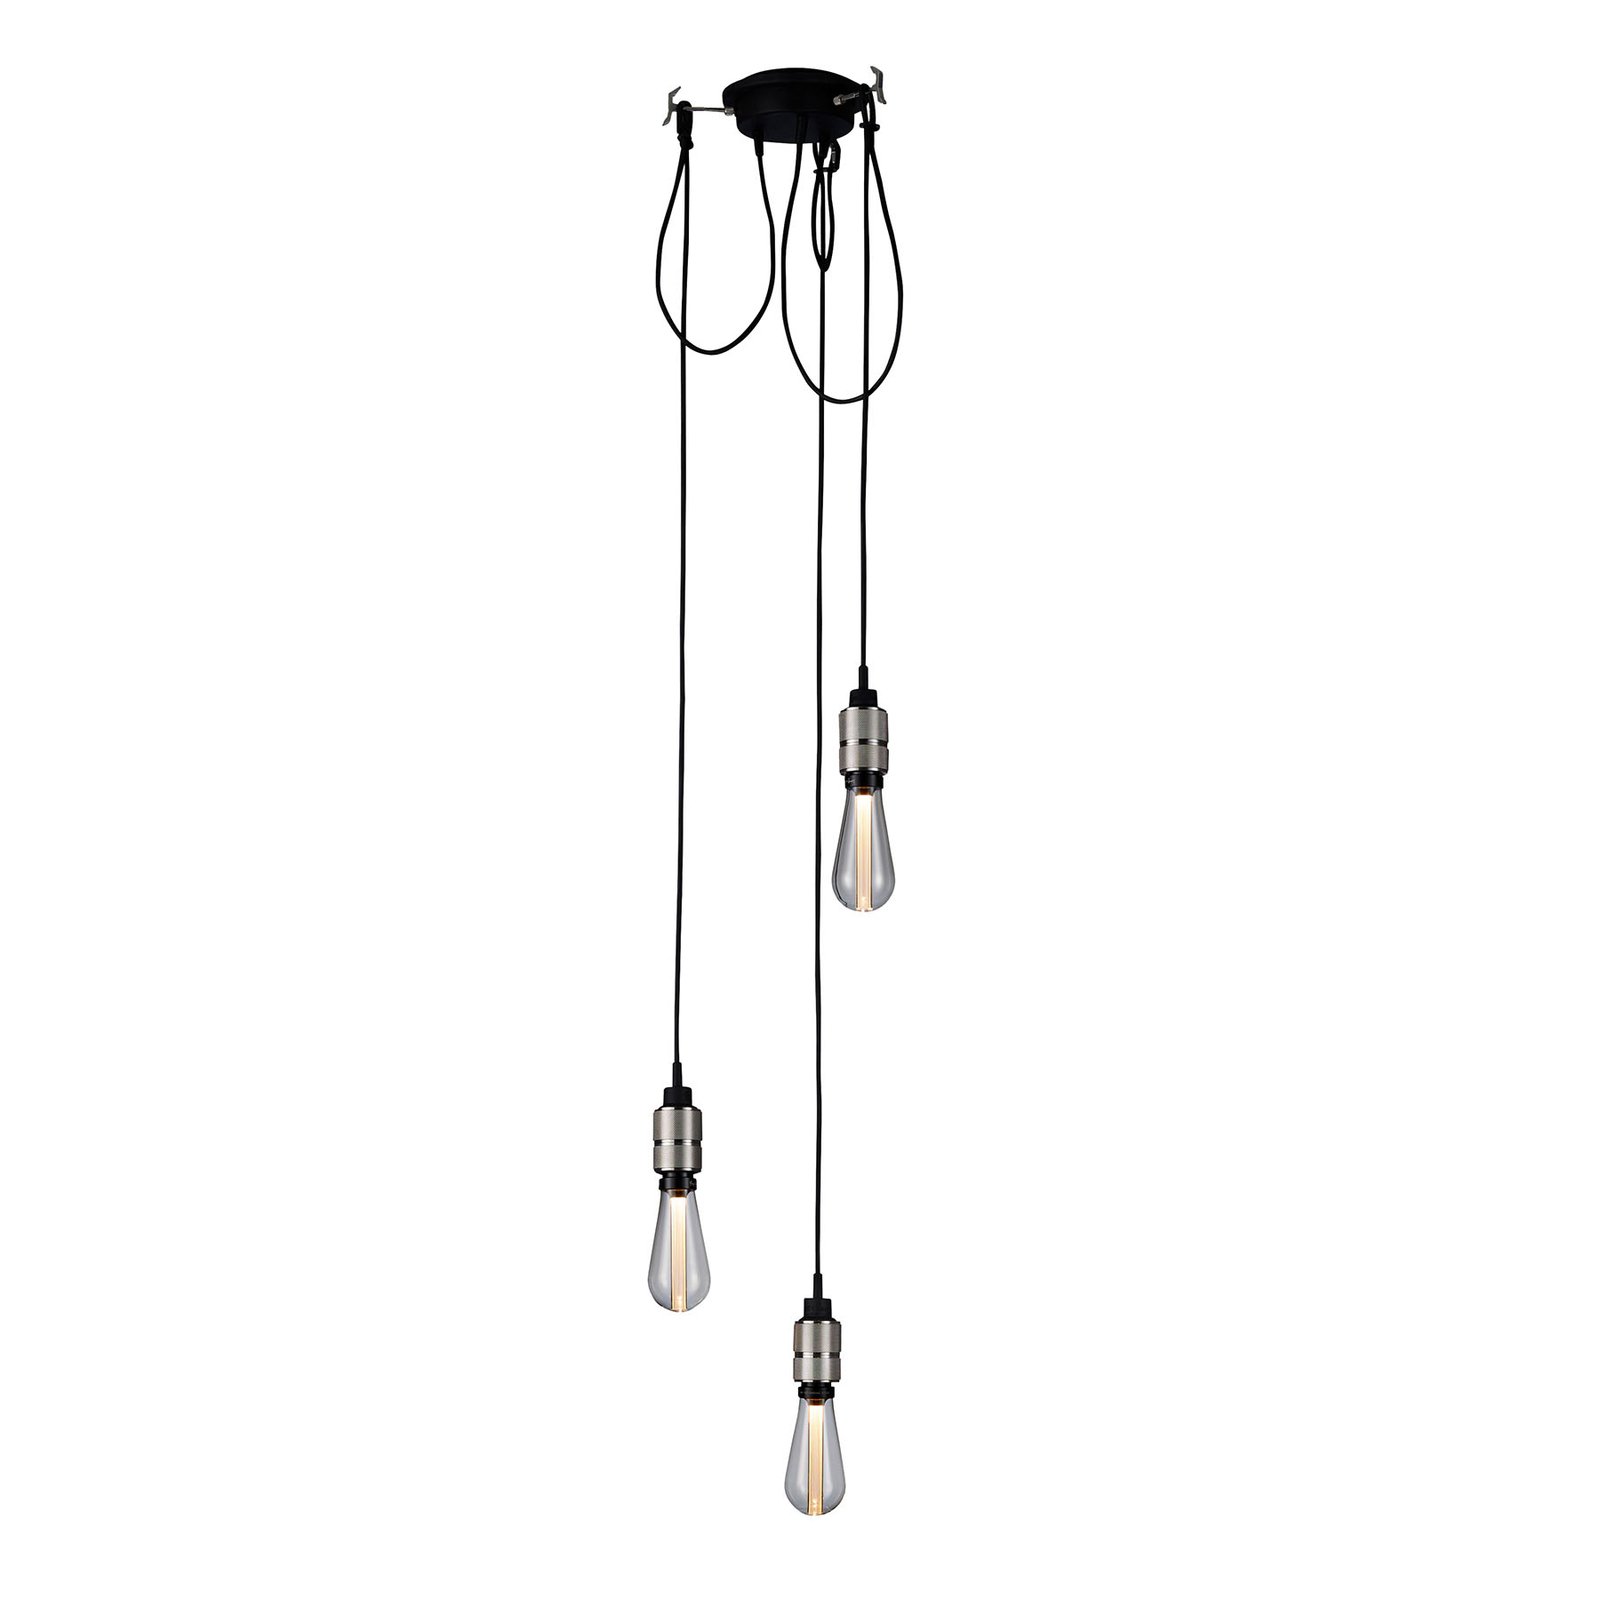 Buster + Punch Hooked 3.0 nude hanglamp staal